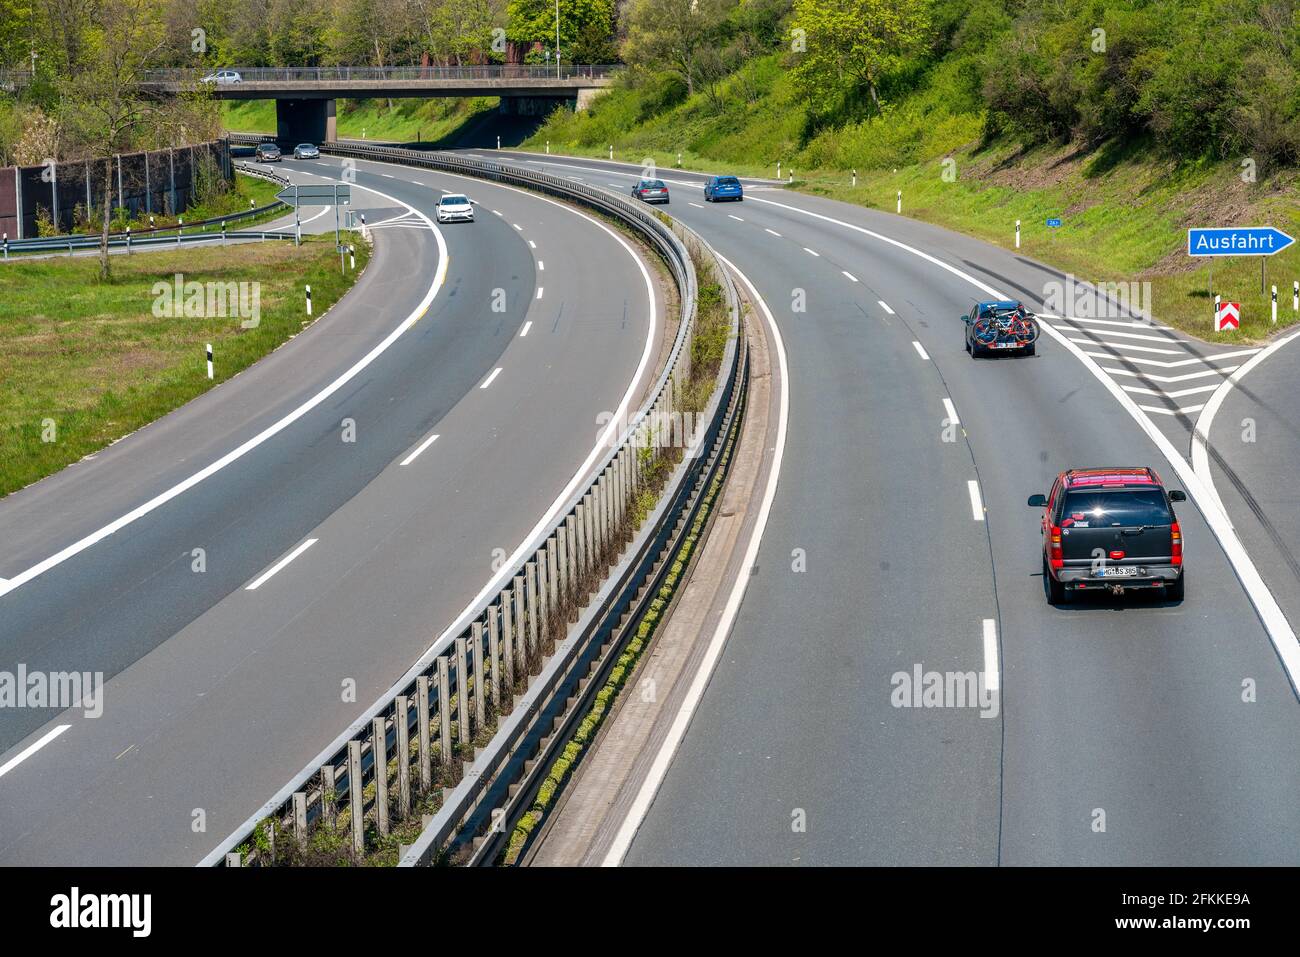 Viersen, Germany 25 April 2021: Car traffic on the Autobahn in Germany Stock Photo